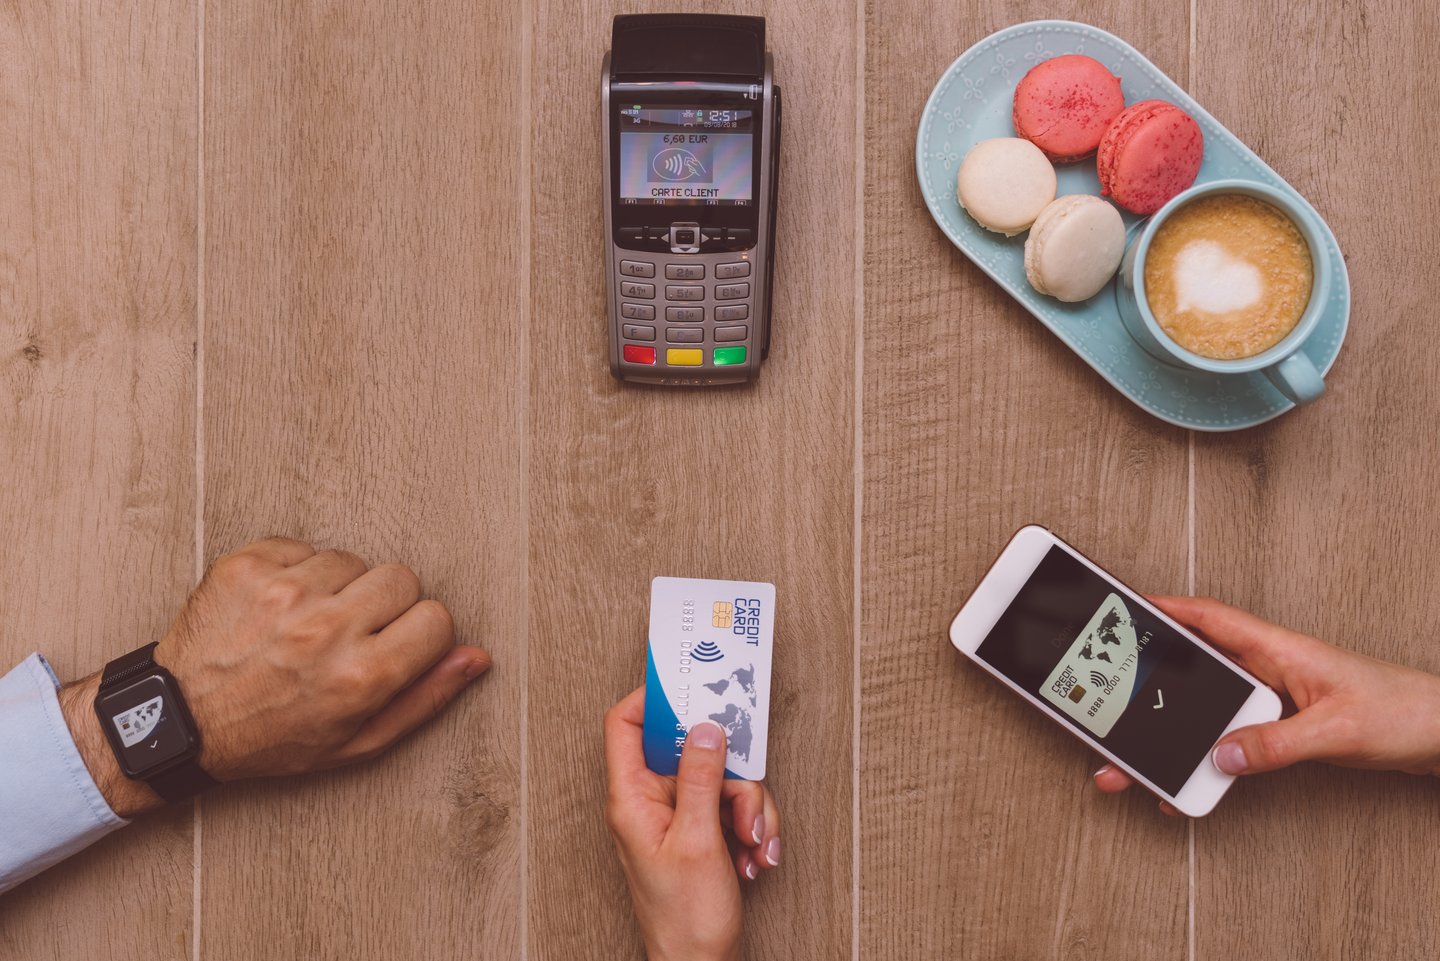 Digital wallet, mobile payment and credit card ready to pay for coffee and macaroons at POS terminal